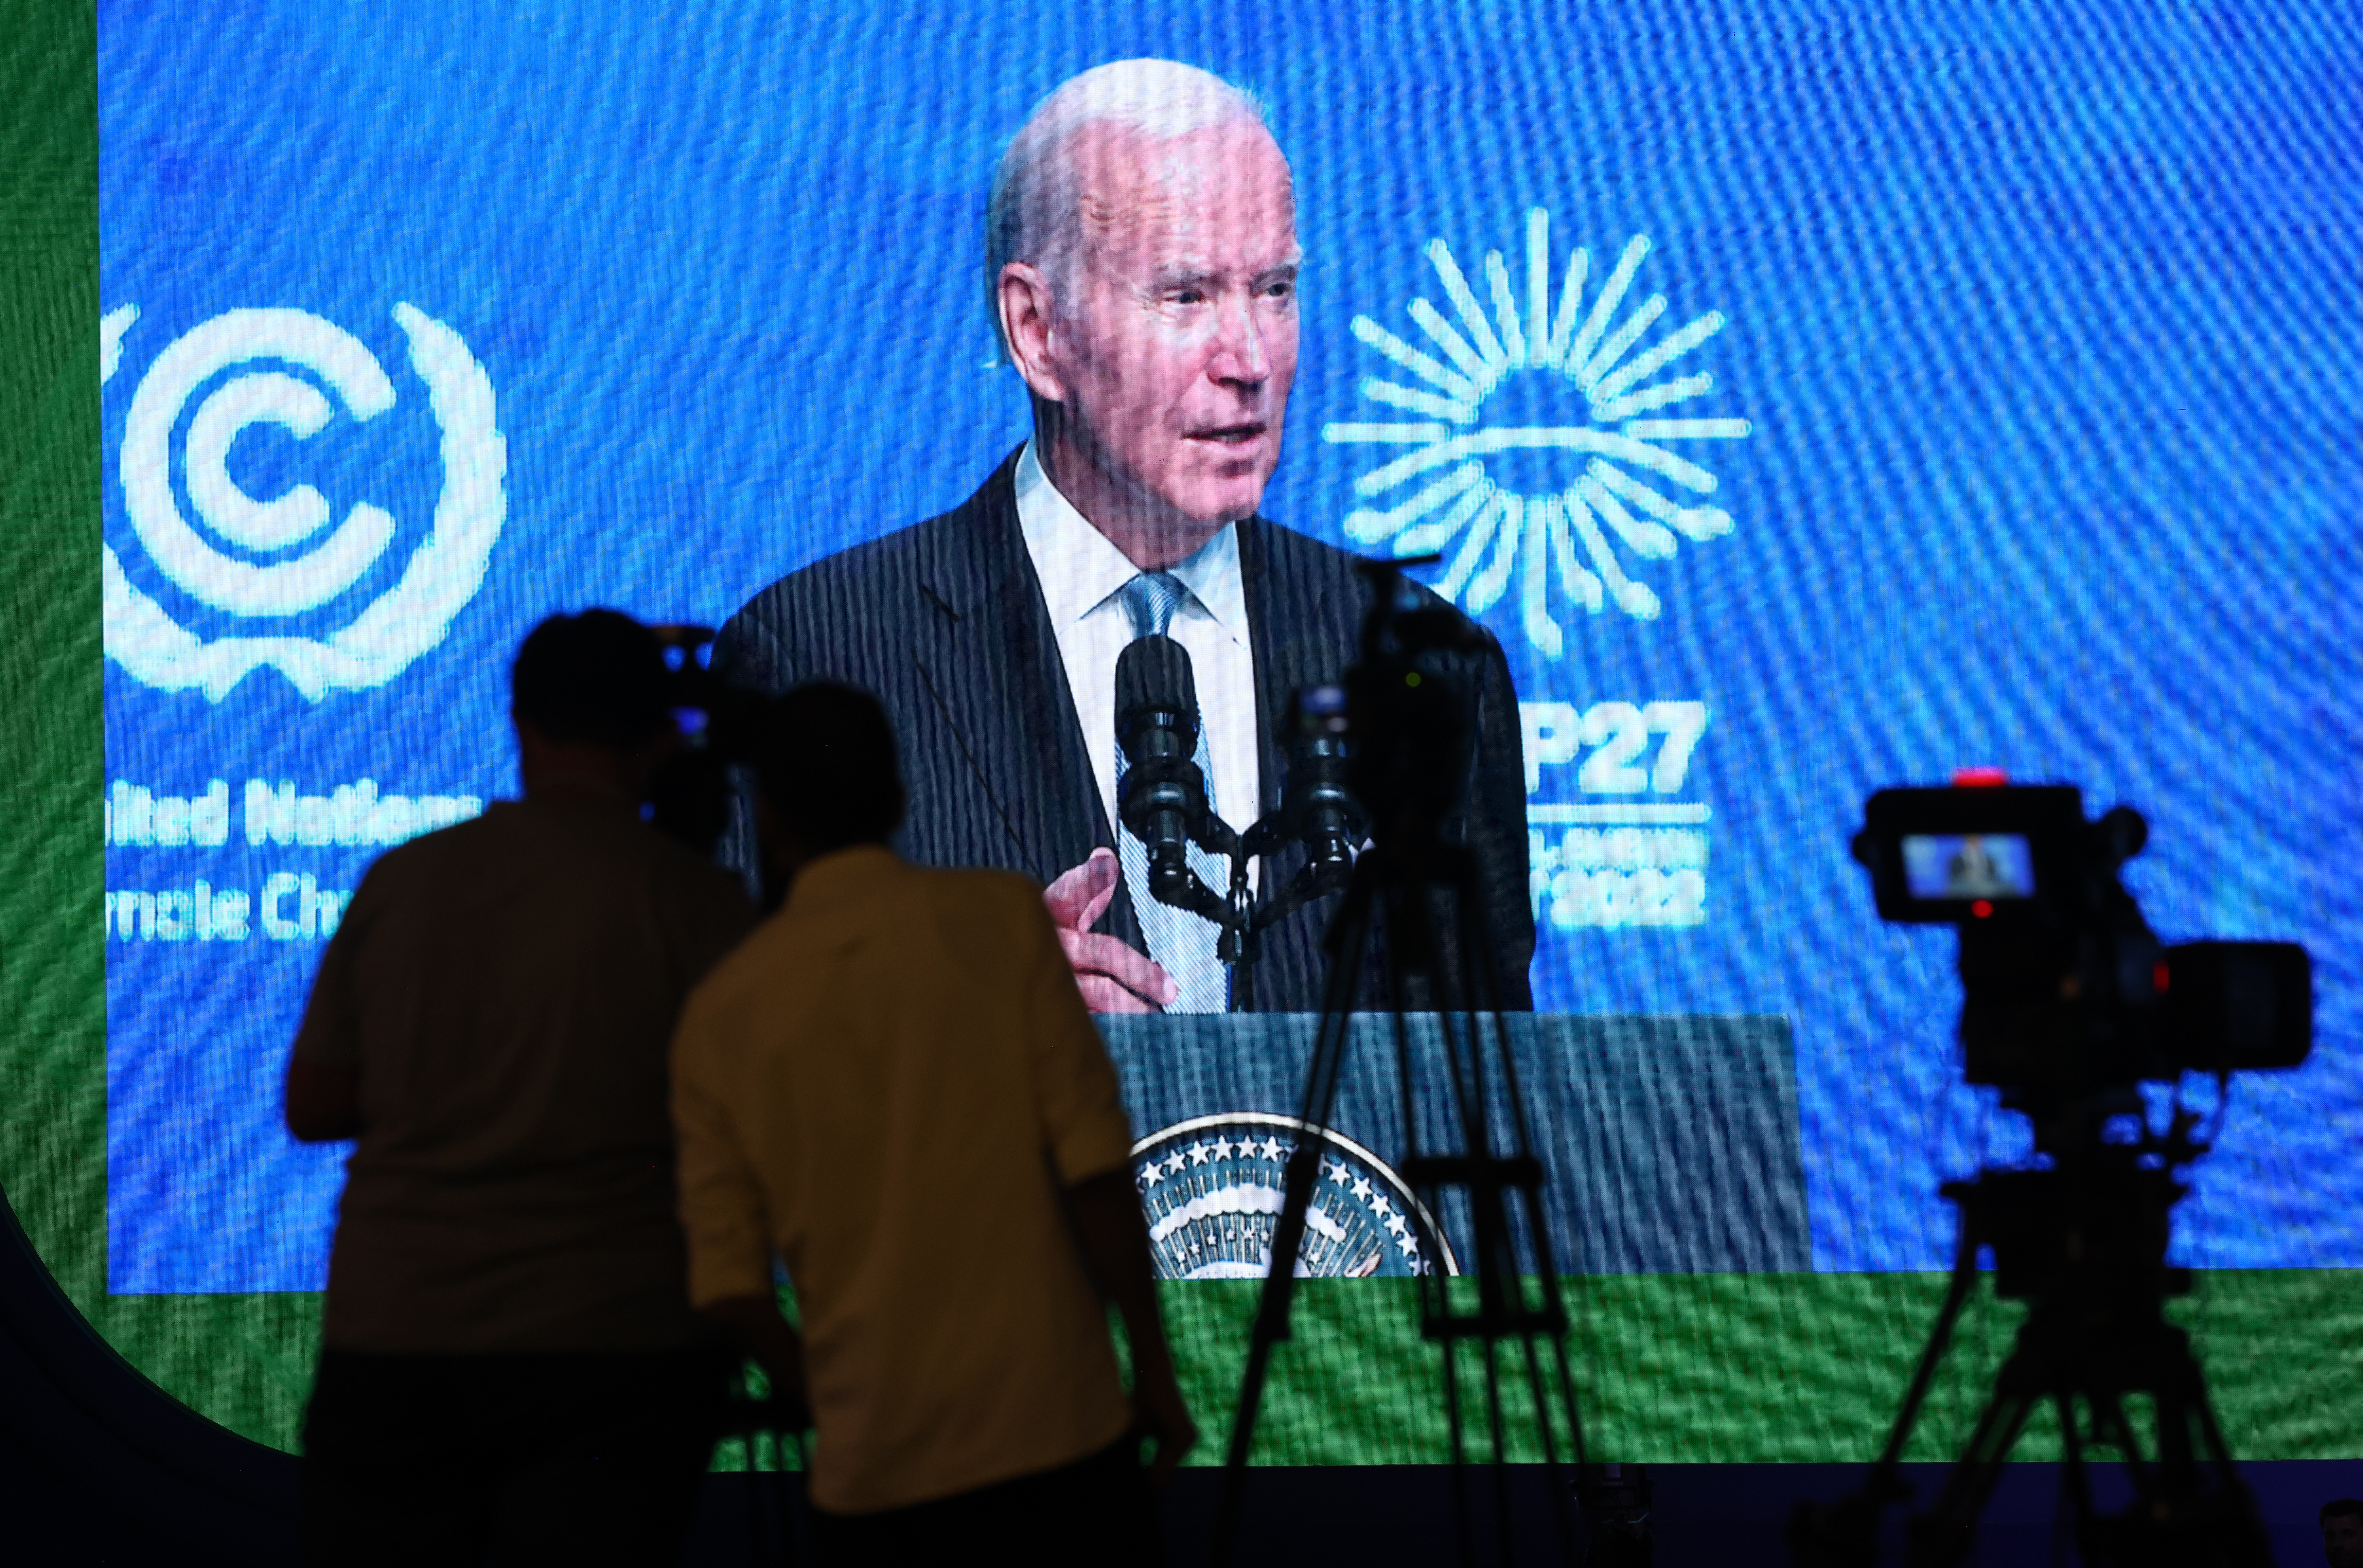 Two men watch President Joe Biden speak on a large screen. Behind Biden is a blue background with the UN climate change and COP logos. 